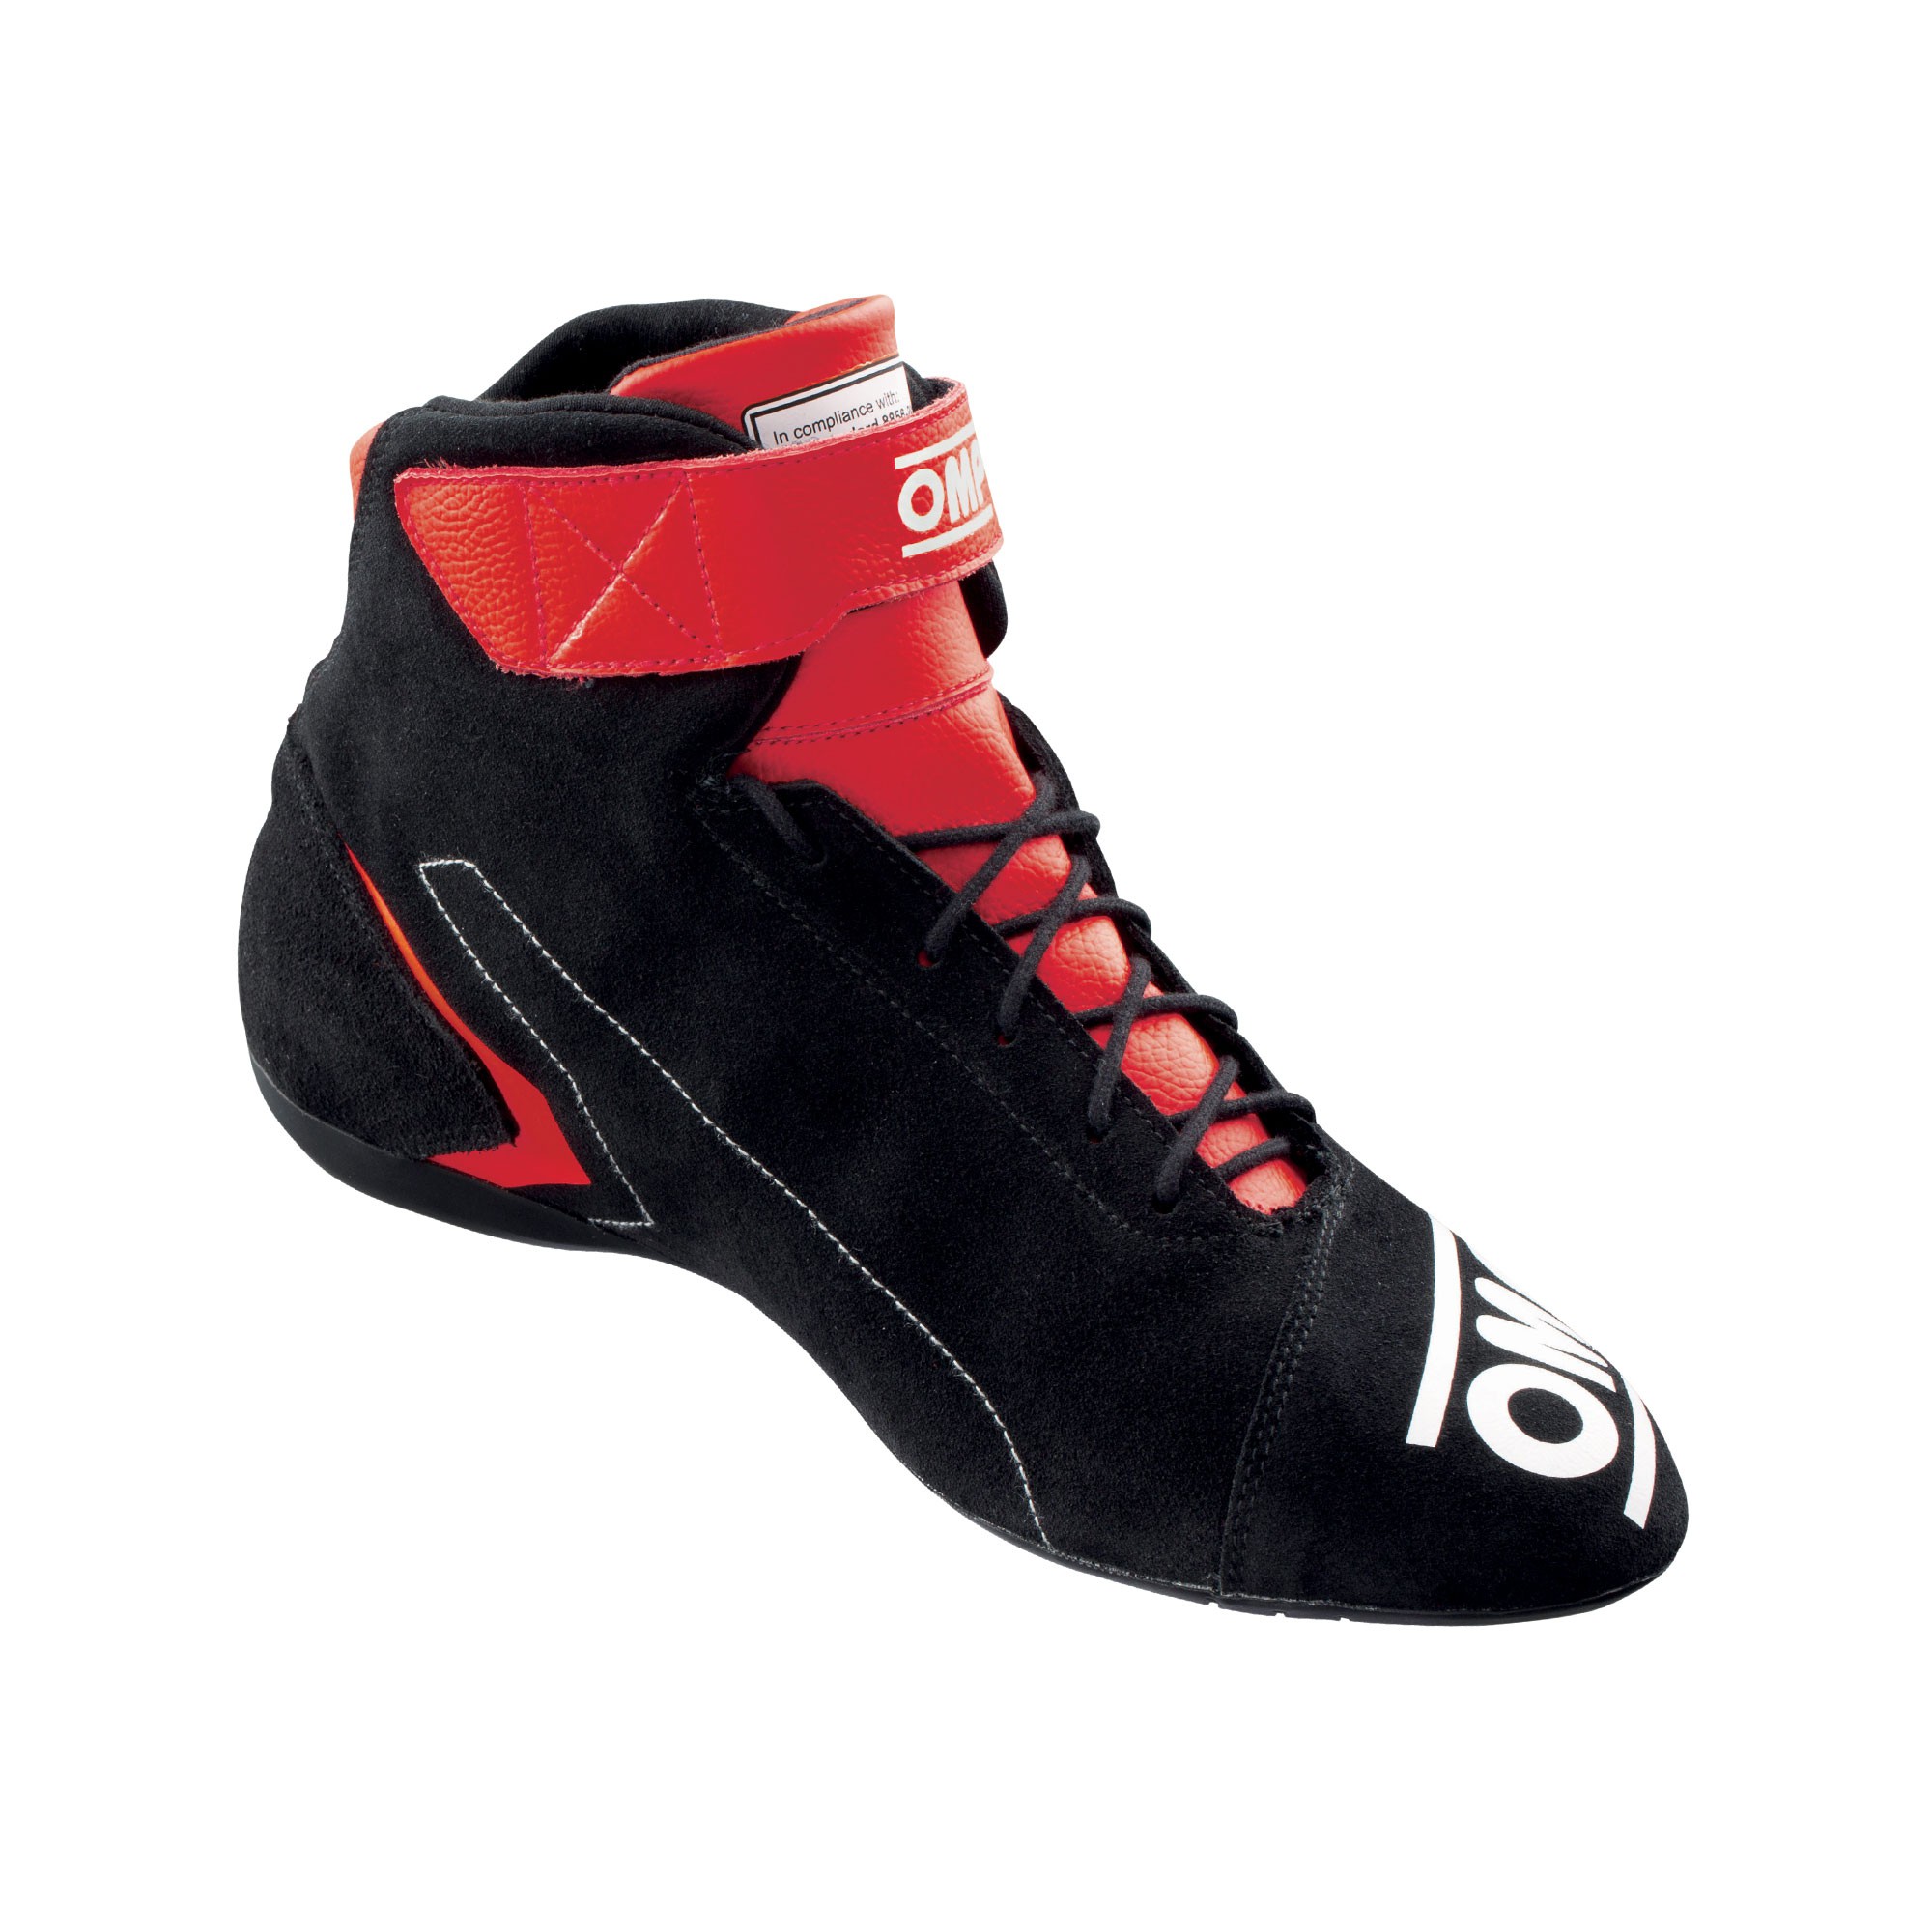 STR Racing Boots FIA 8856-2000 High Quality Race Show UK Size 2.5-13.5 